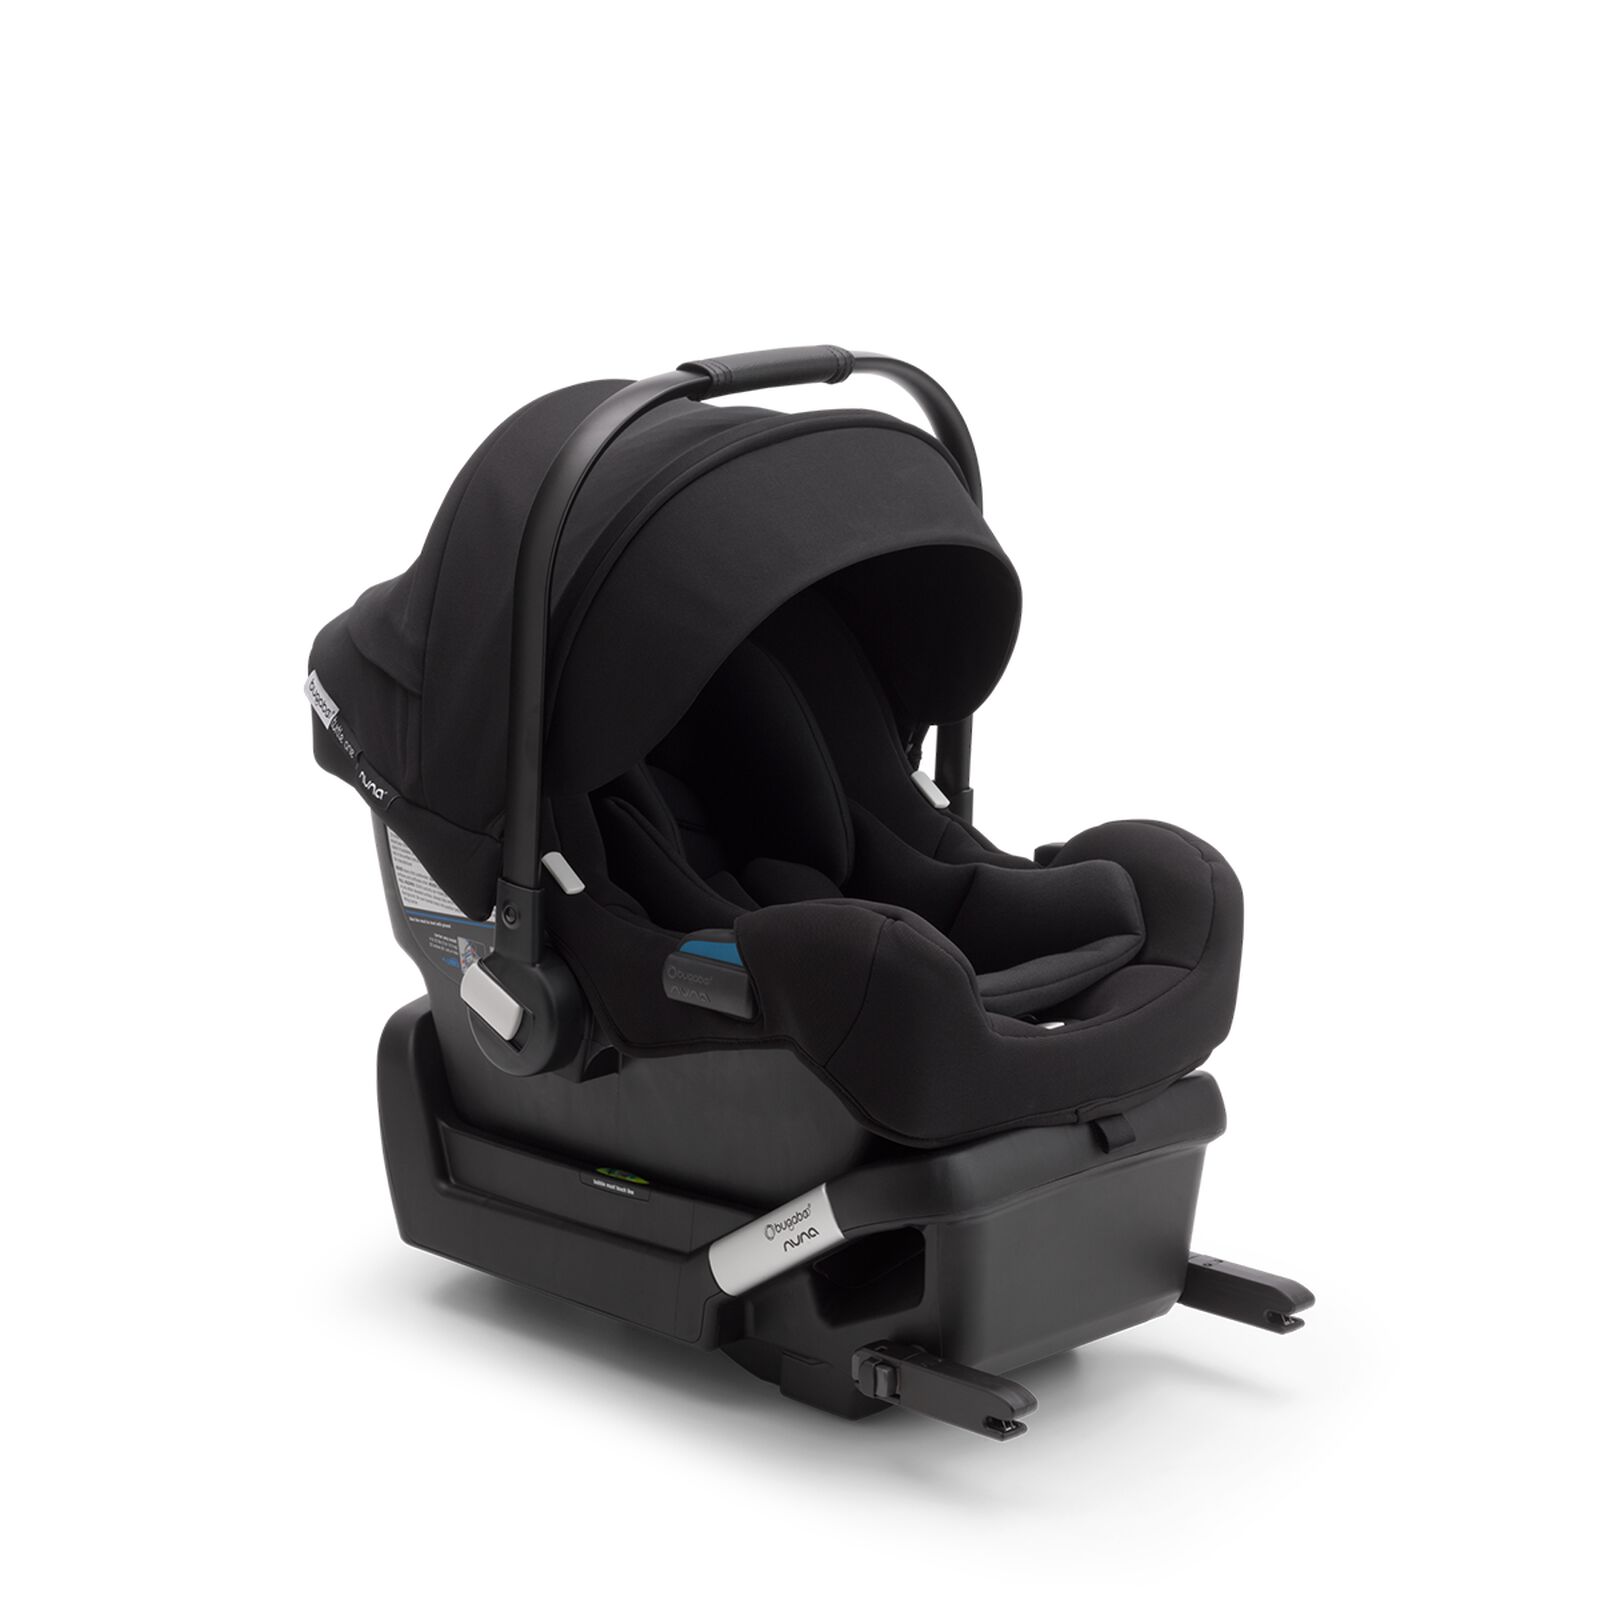 Bugaboo Bee 6 and Turtle One by Nuna bundle - View 3